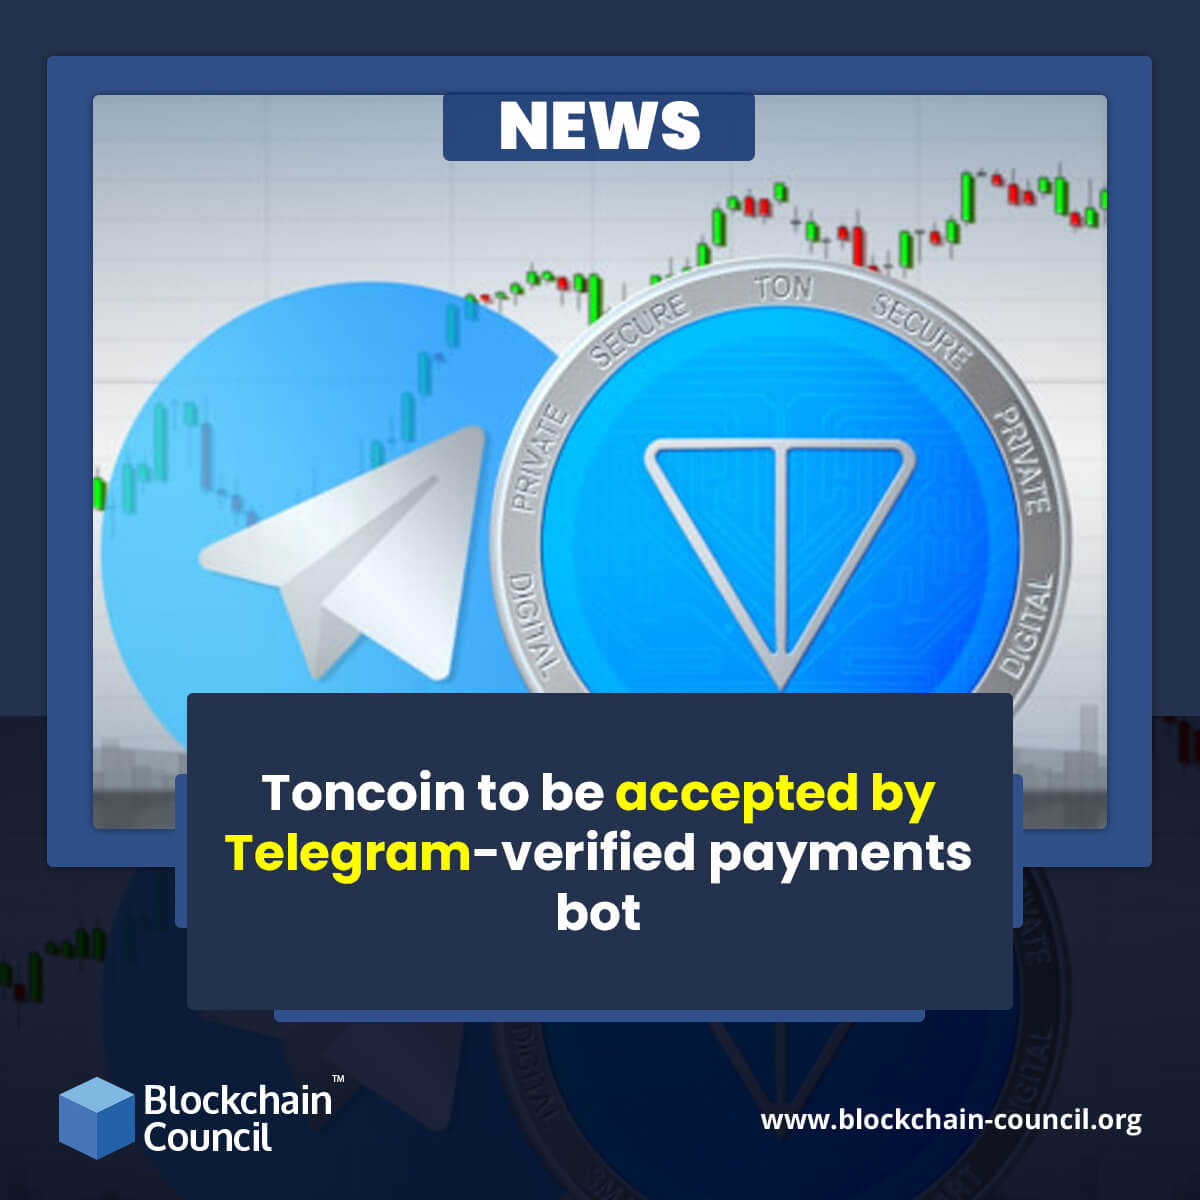 Toncoin to be accepted by Telegram-verified payments bot